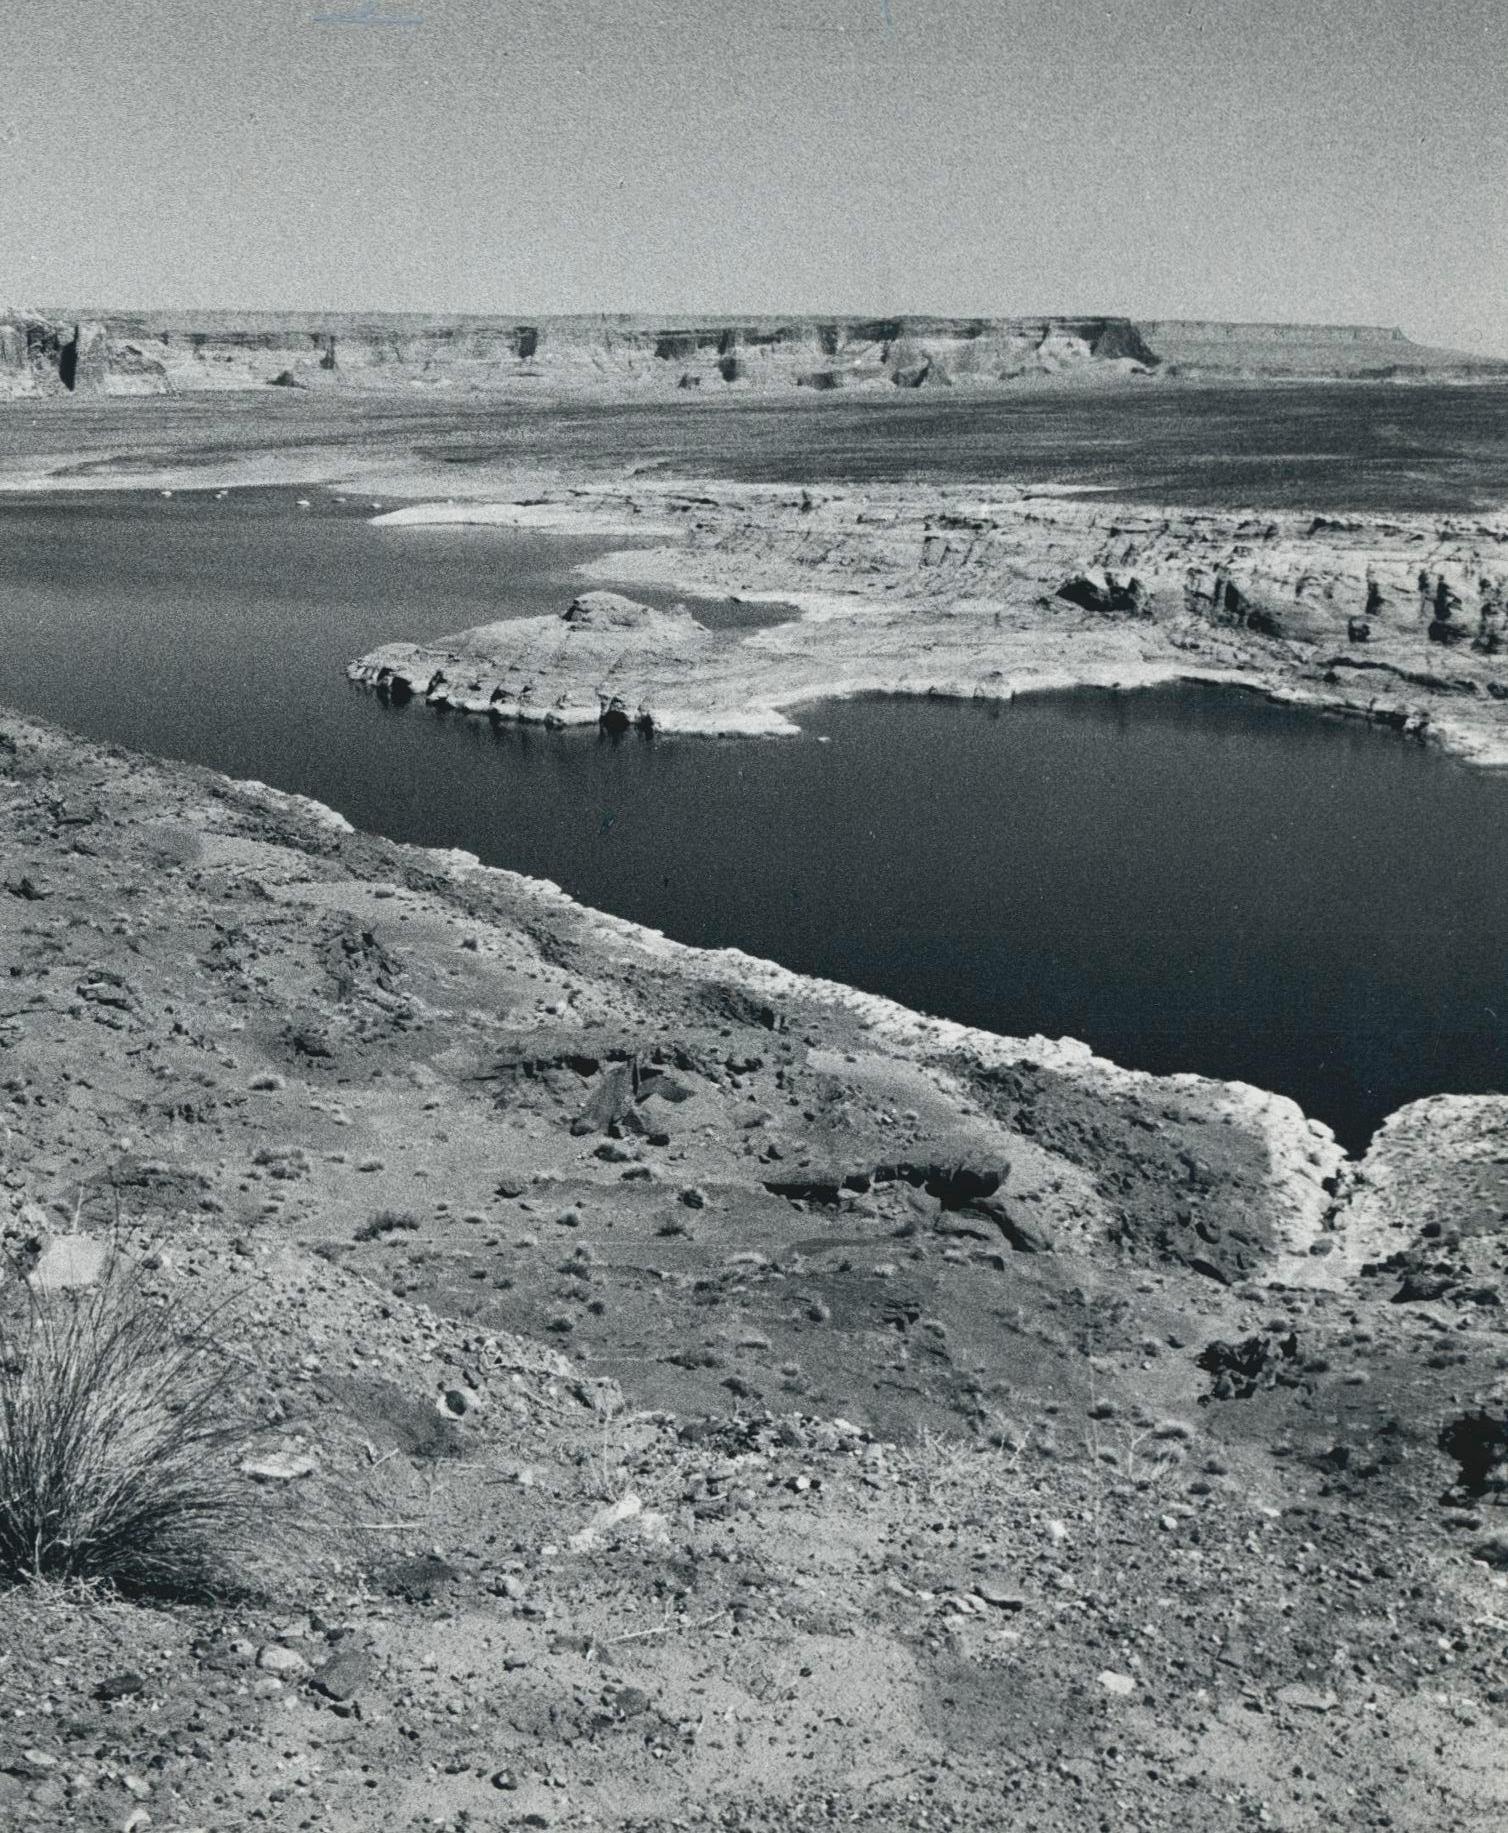 Lake Powell, Utah/Arizona, Black and White, USA 1960s, 15, 7 x 23, 3 cm - Photograph by Erich Andres